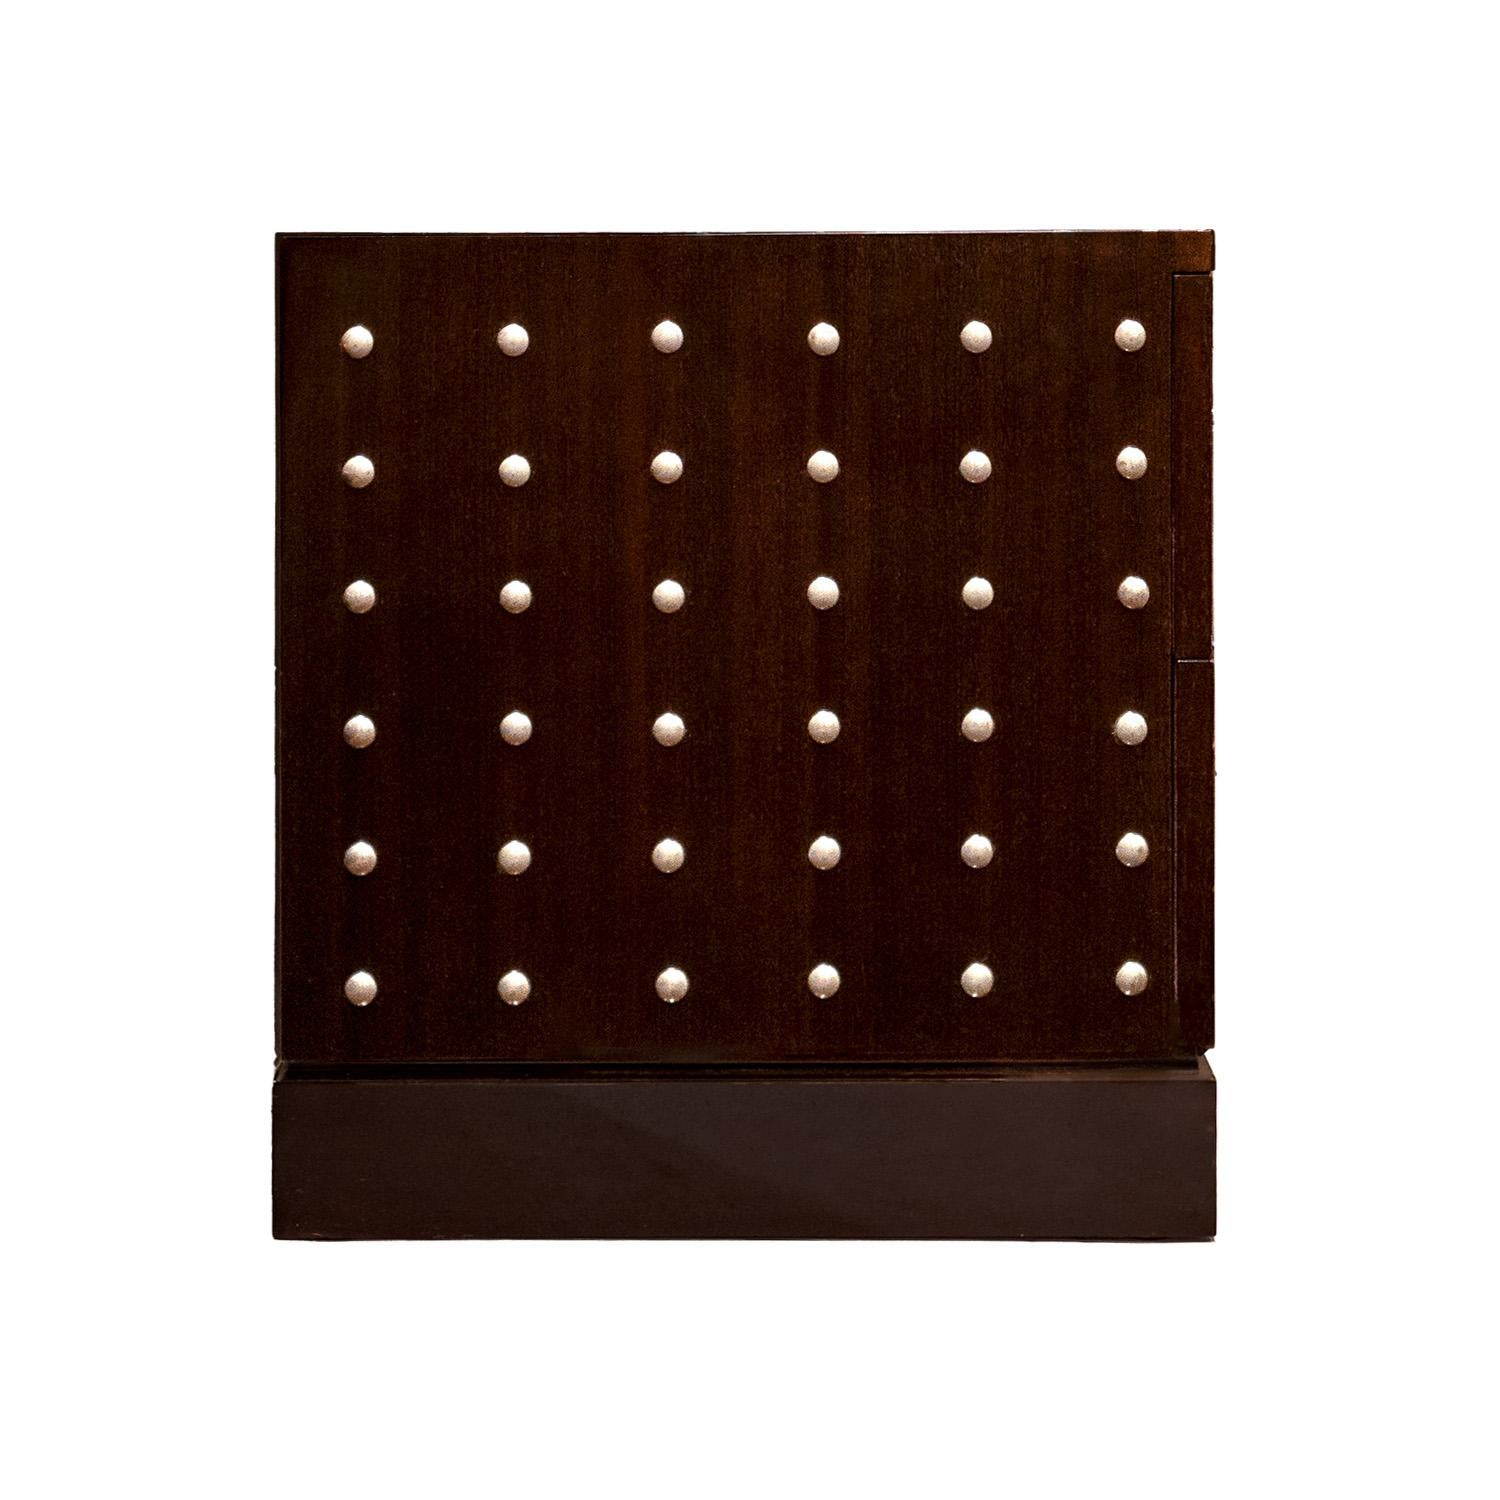 American Tommi Parzinger Iconic Studded Small Chest/Bedside Table 1981